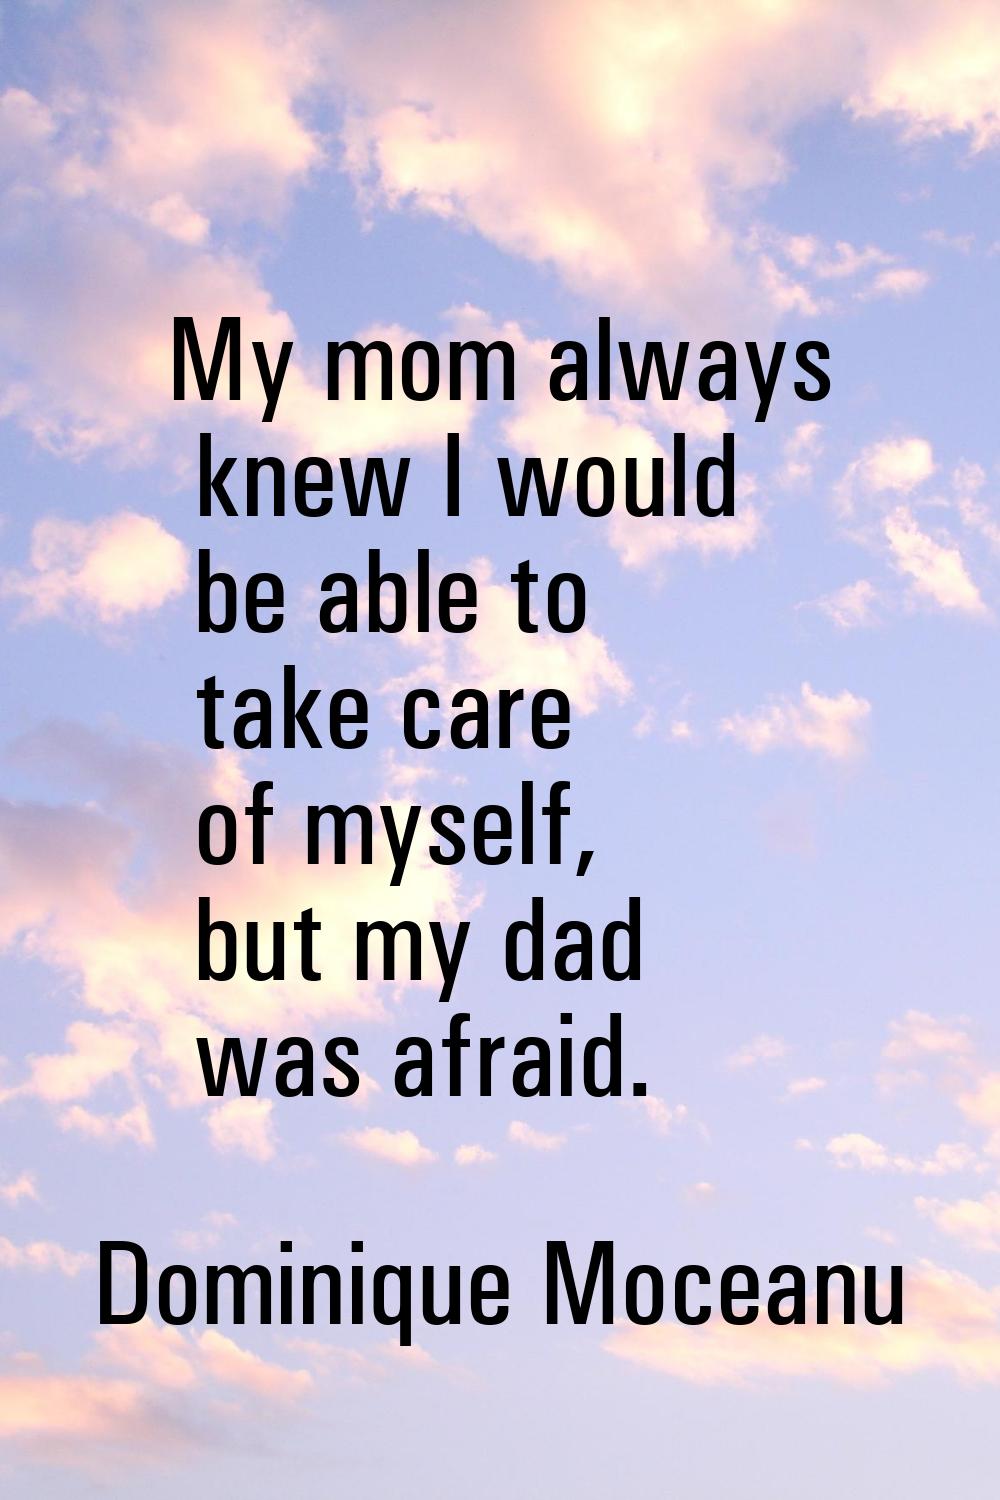 My mom always knew I would be able to take care of myself, but my dad was afraid.